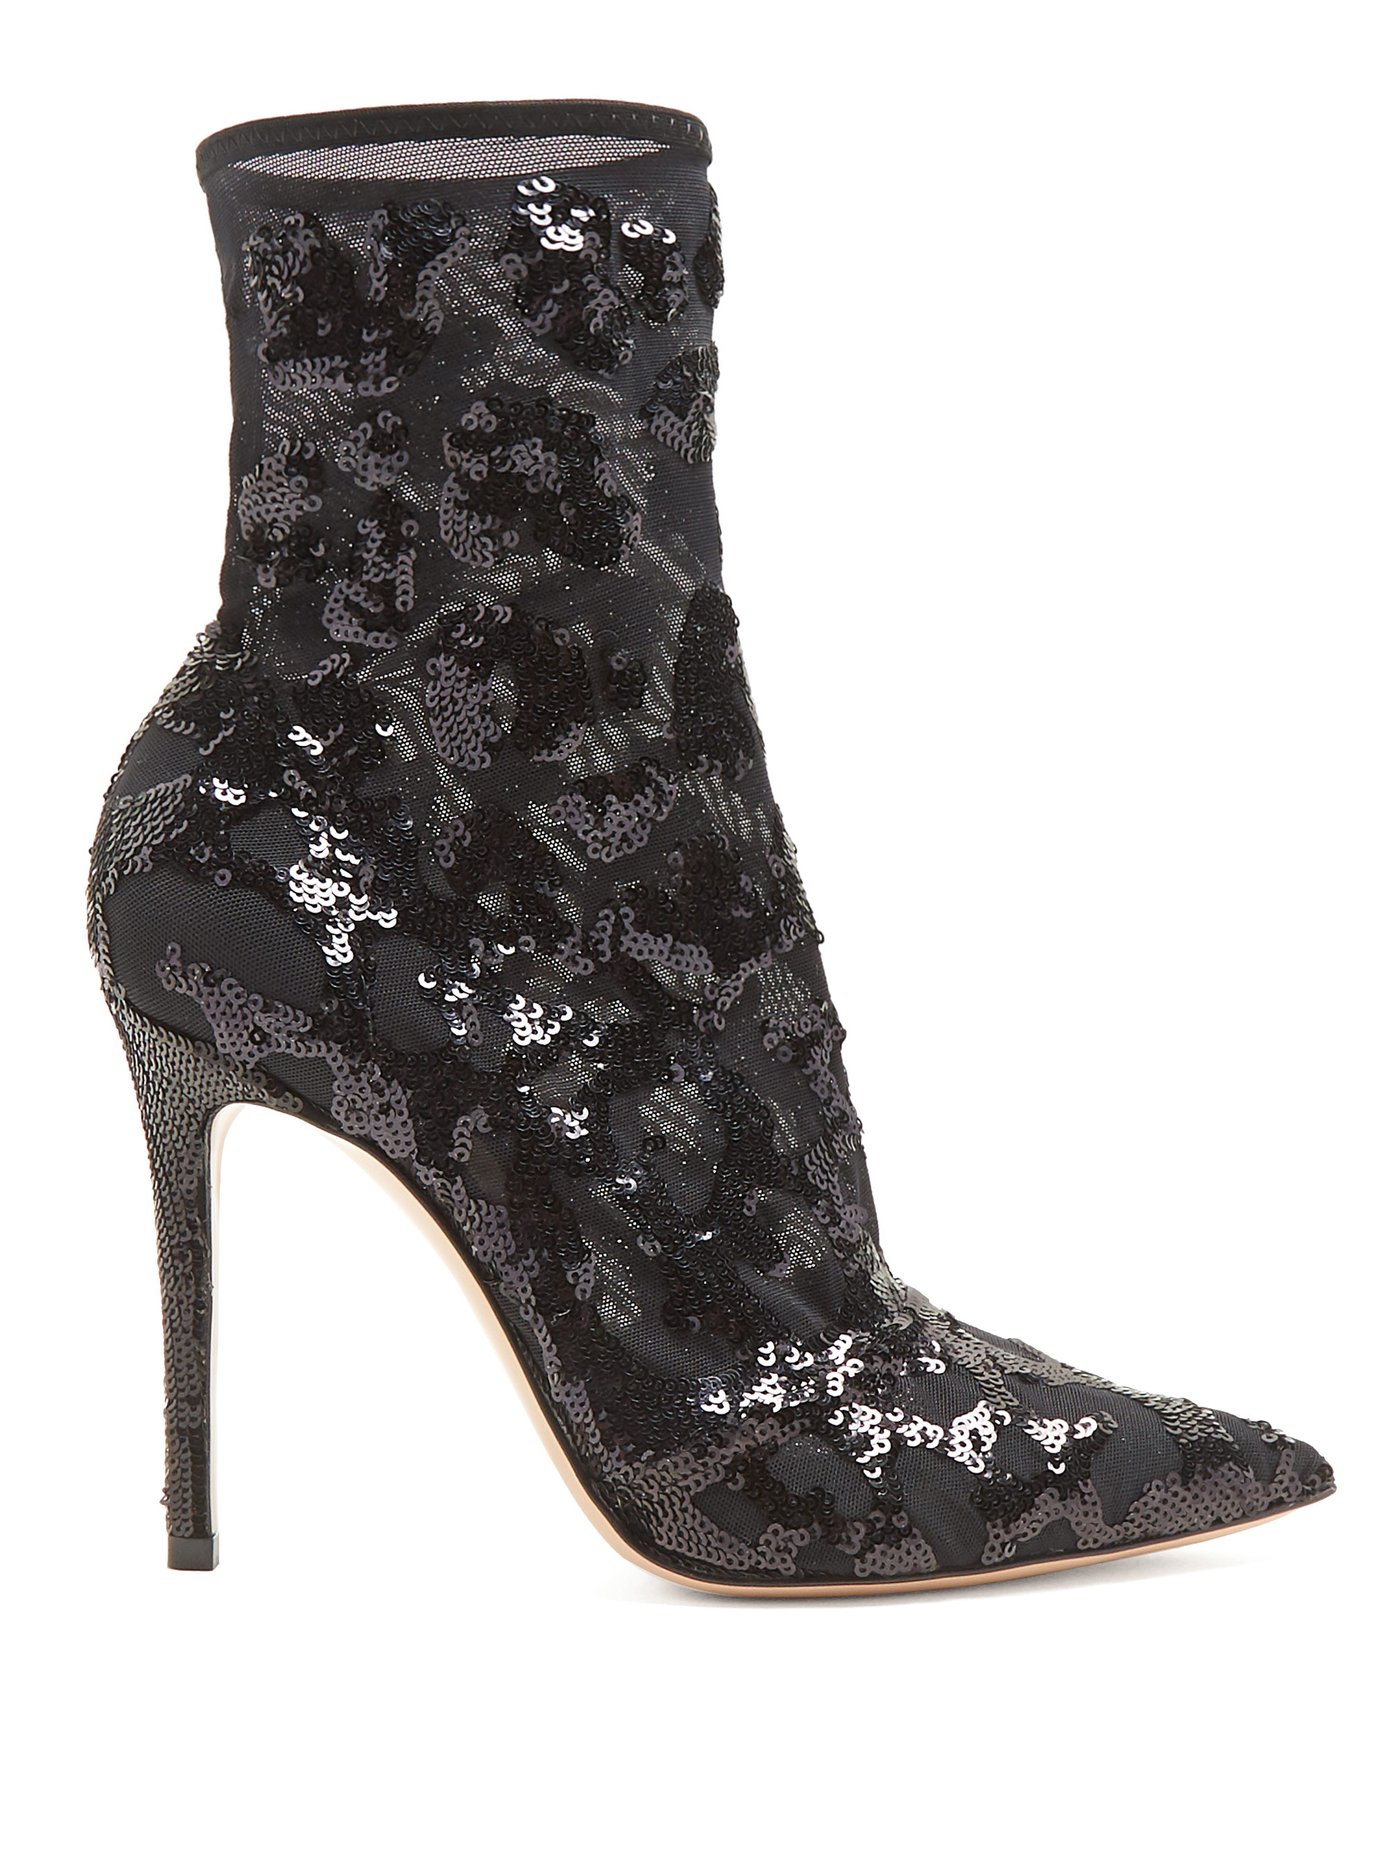 sequin ankle boots uk